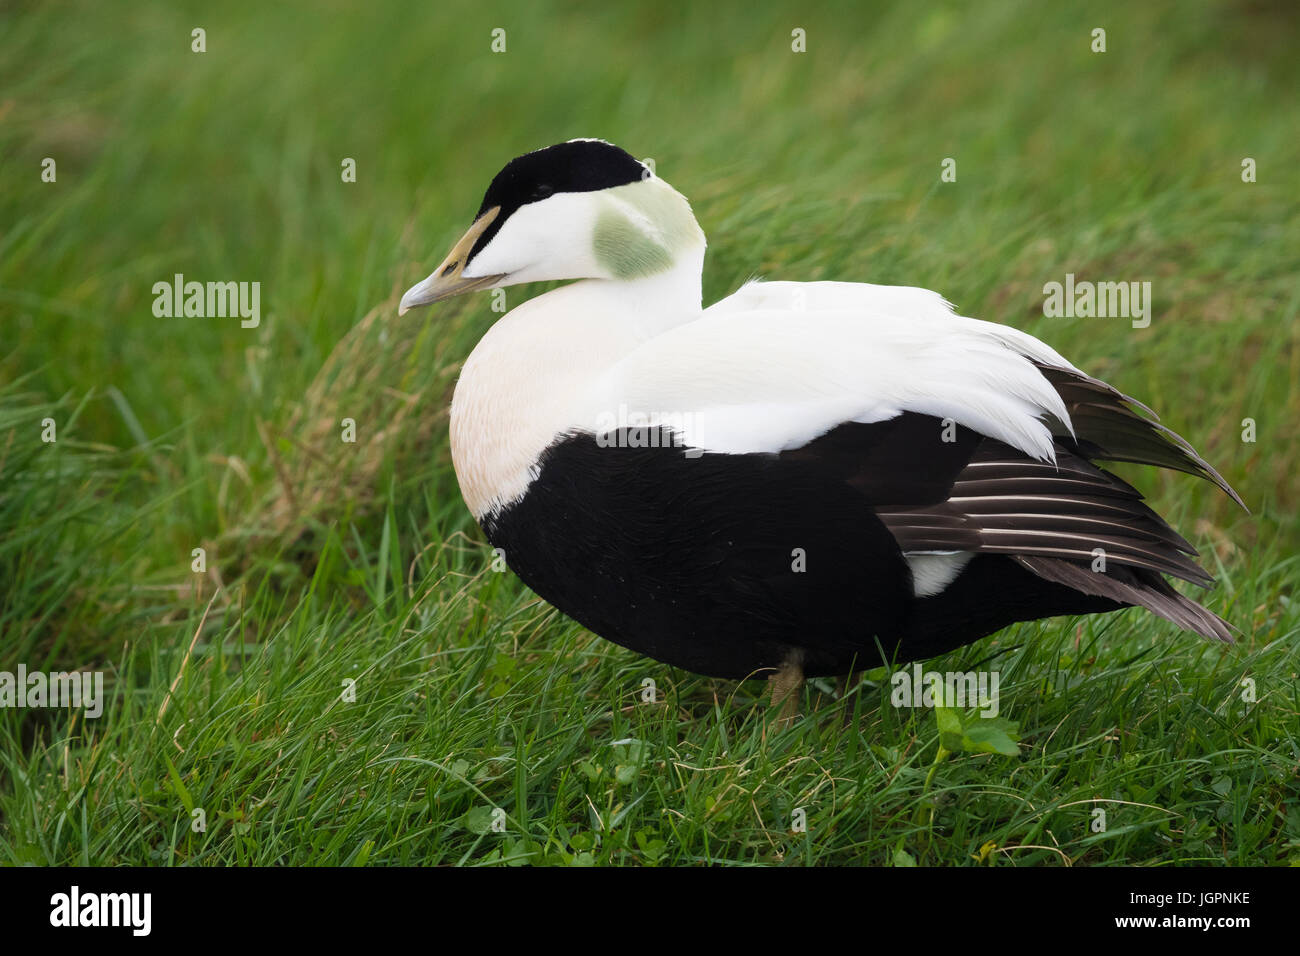 Common Eider (Somateria mollissima), adult male standing on the grass Stock Photo